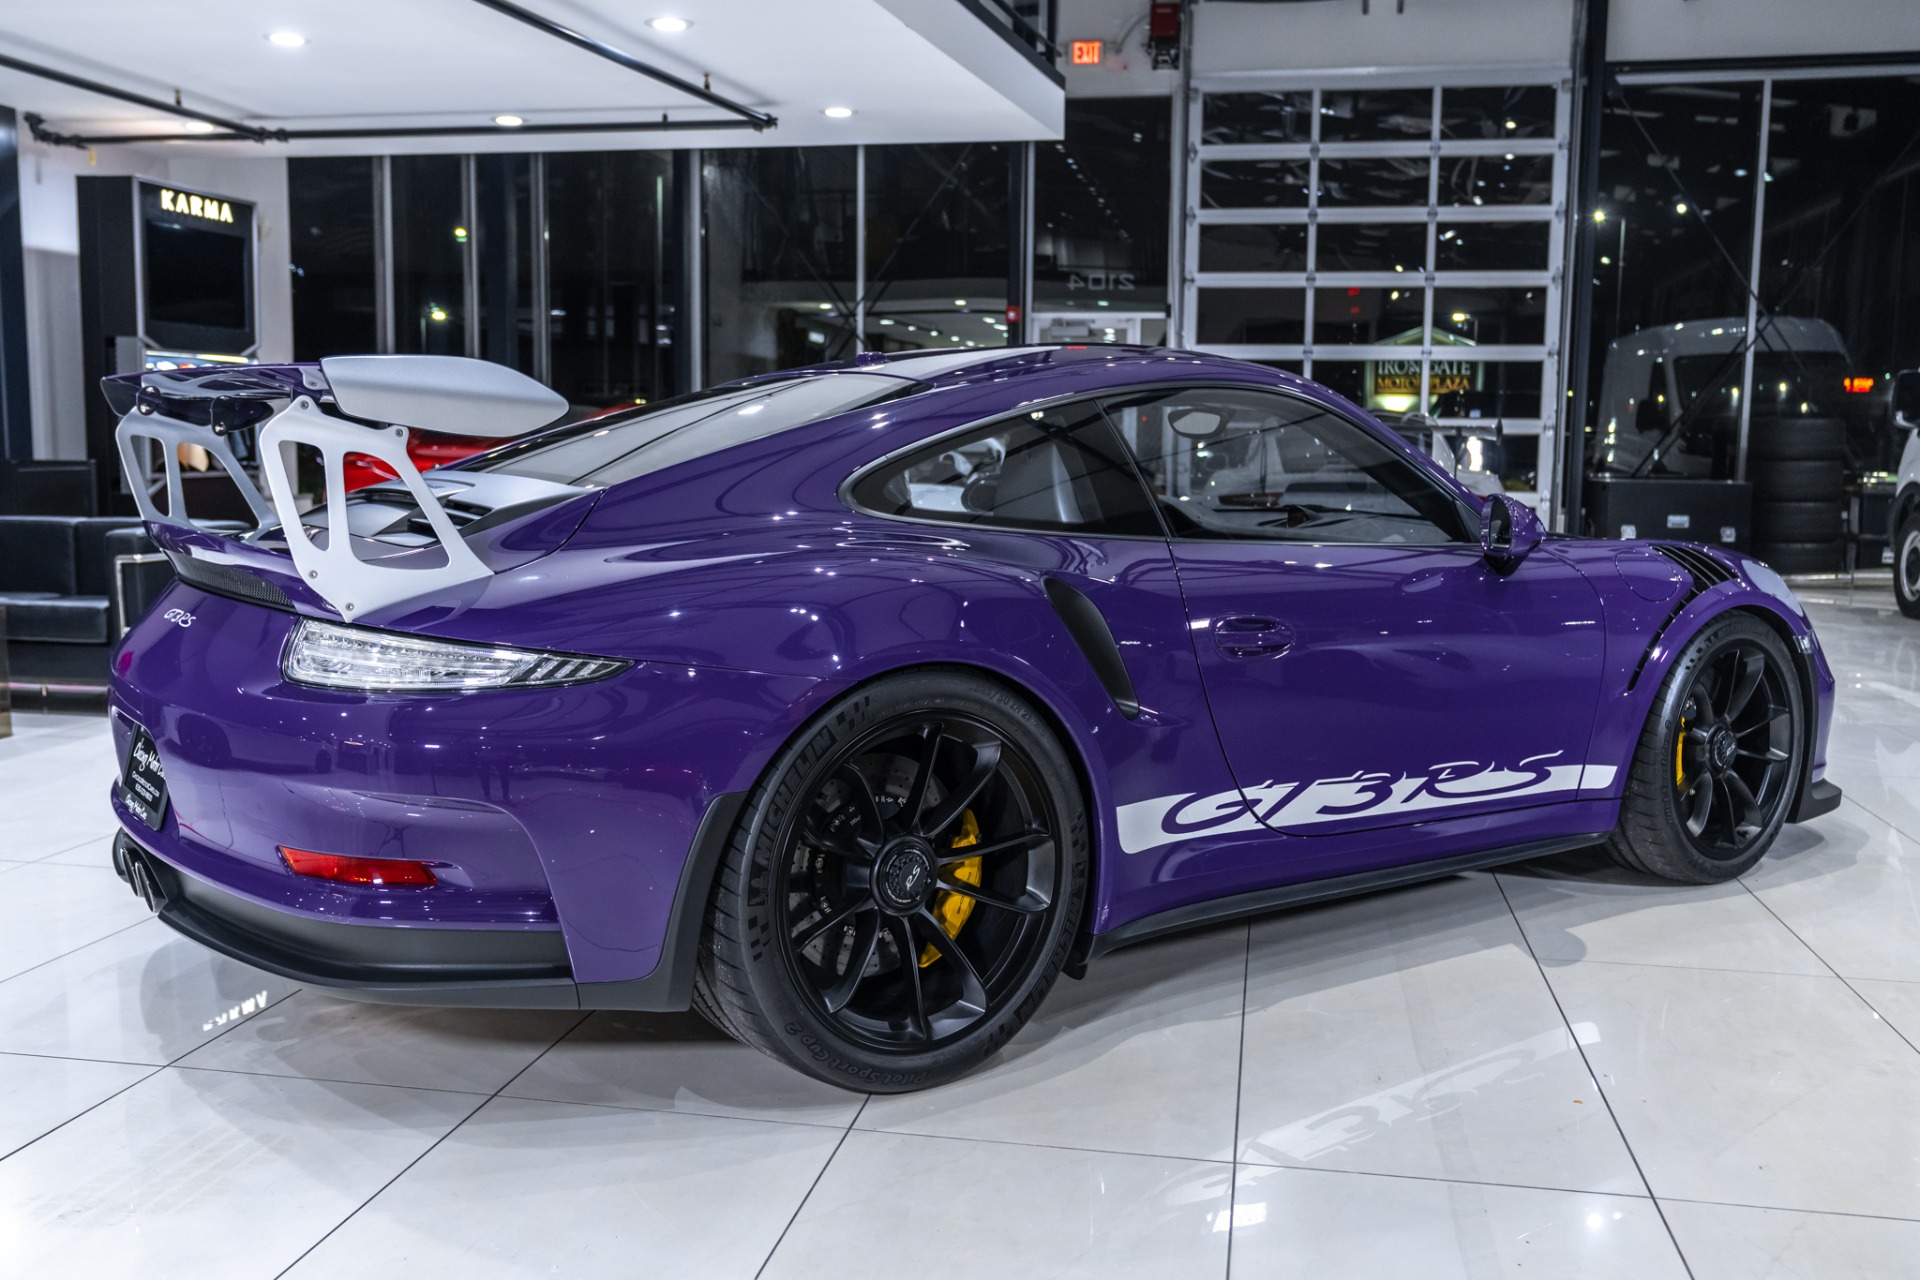 Used-2016-Porsche-911-GT3-RS-Ultraviolet-Loaded-PCCBs-Comfort-Seats-Only-1760-Miles-PPF